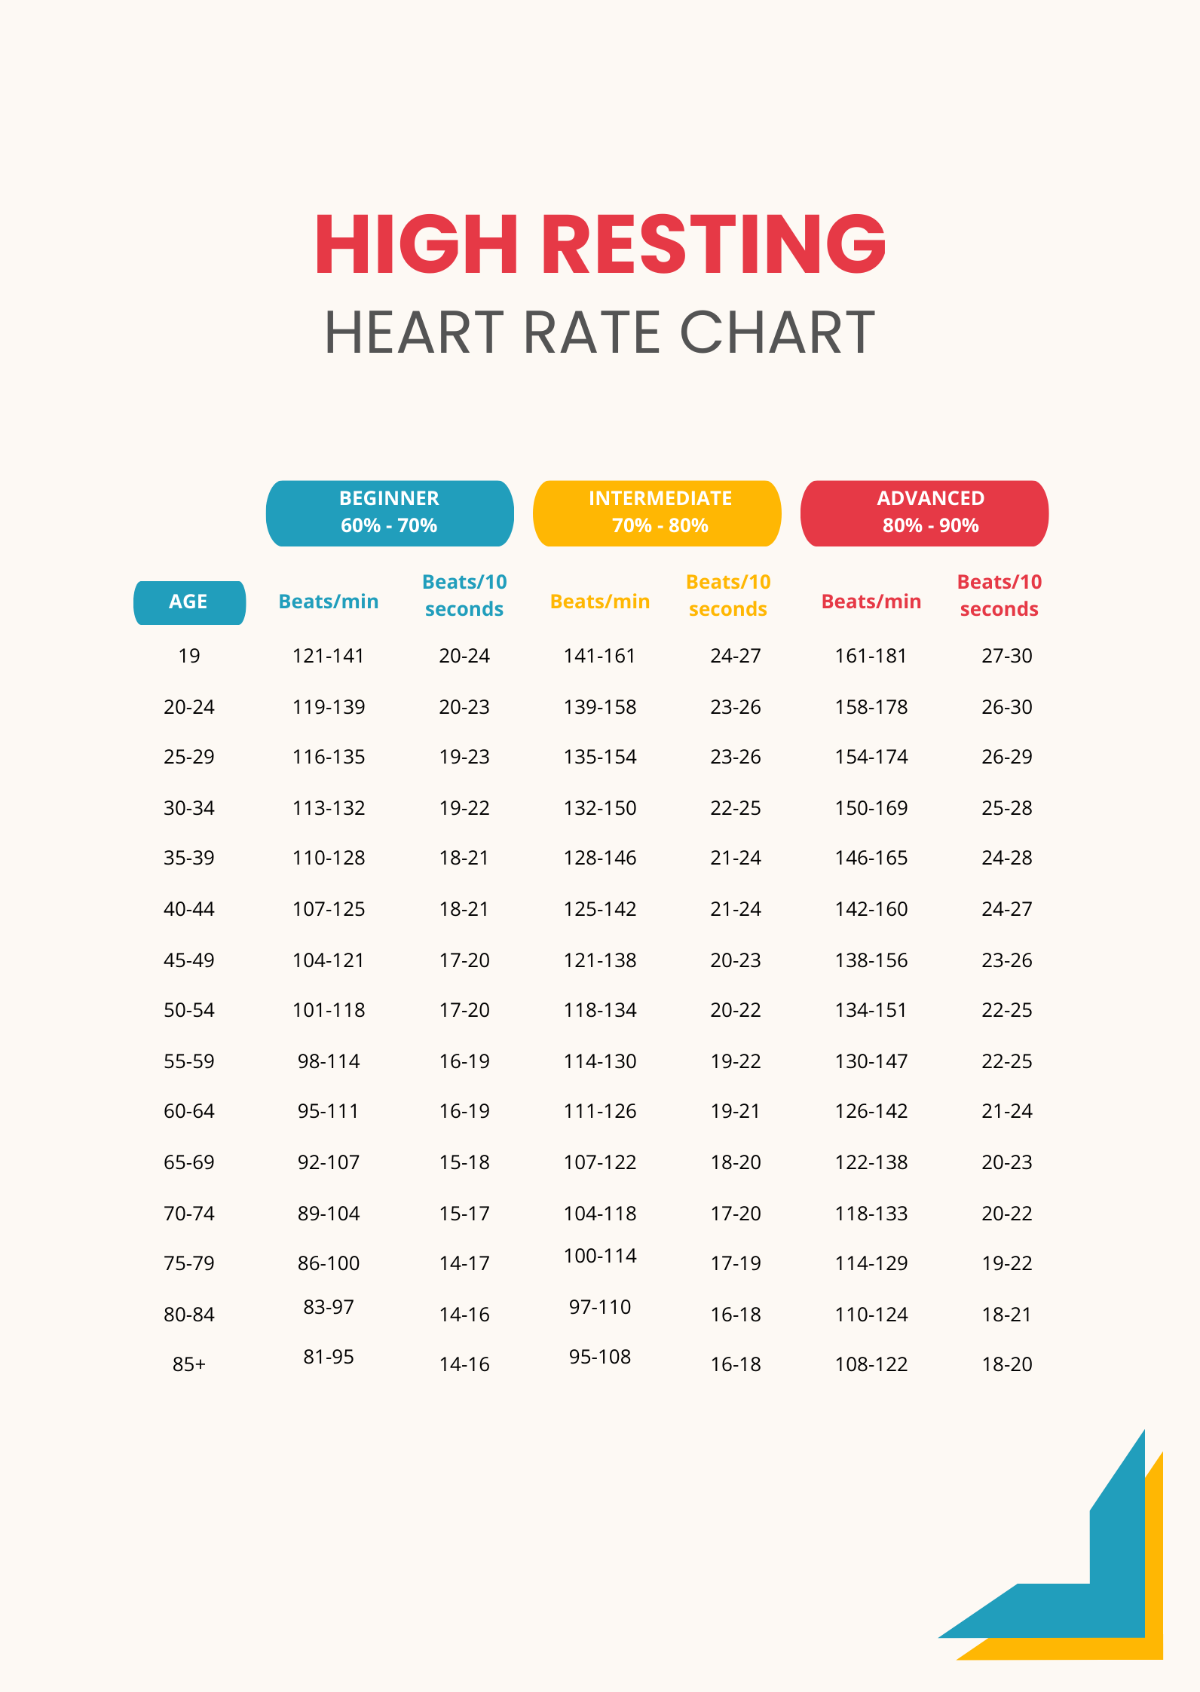 High Resting Heart Rate Chart Template